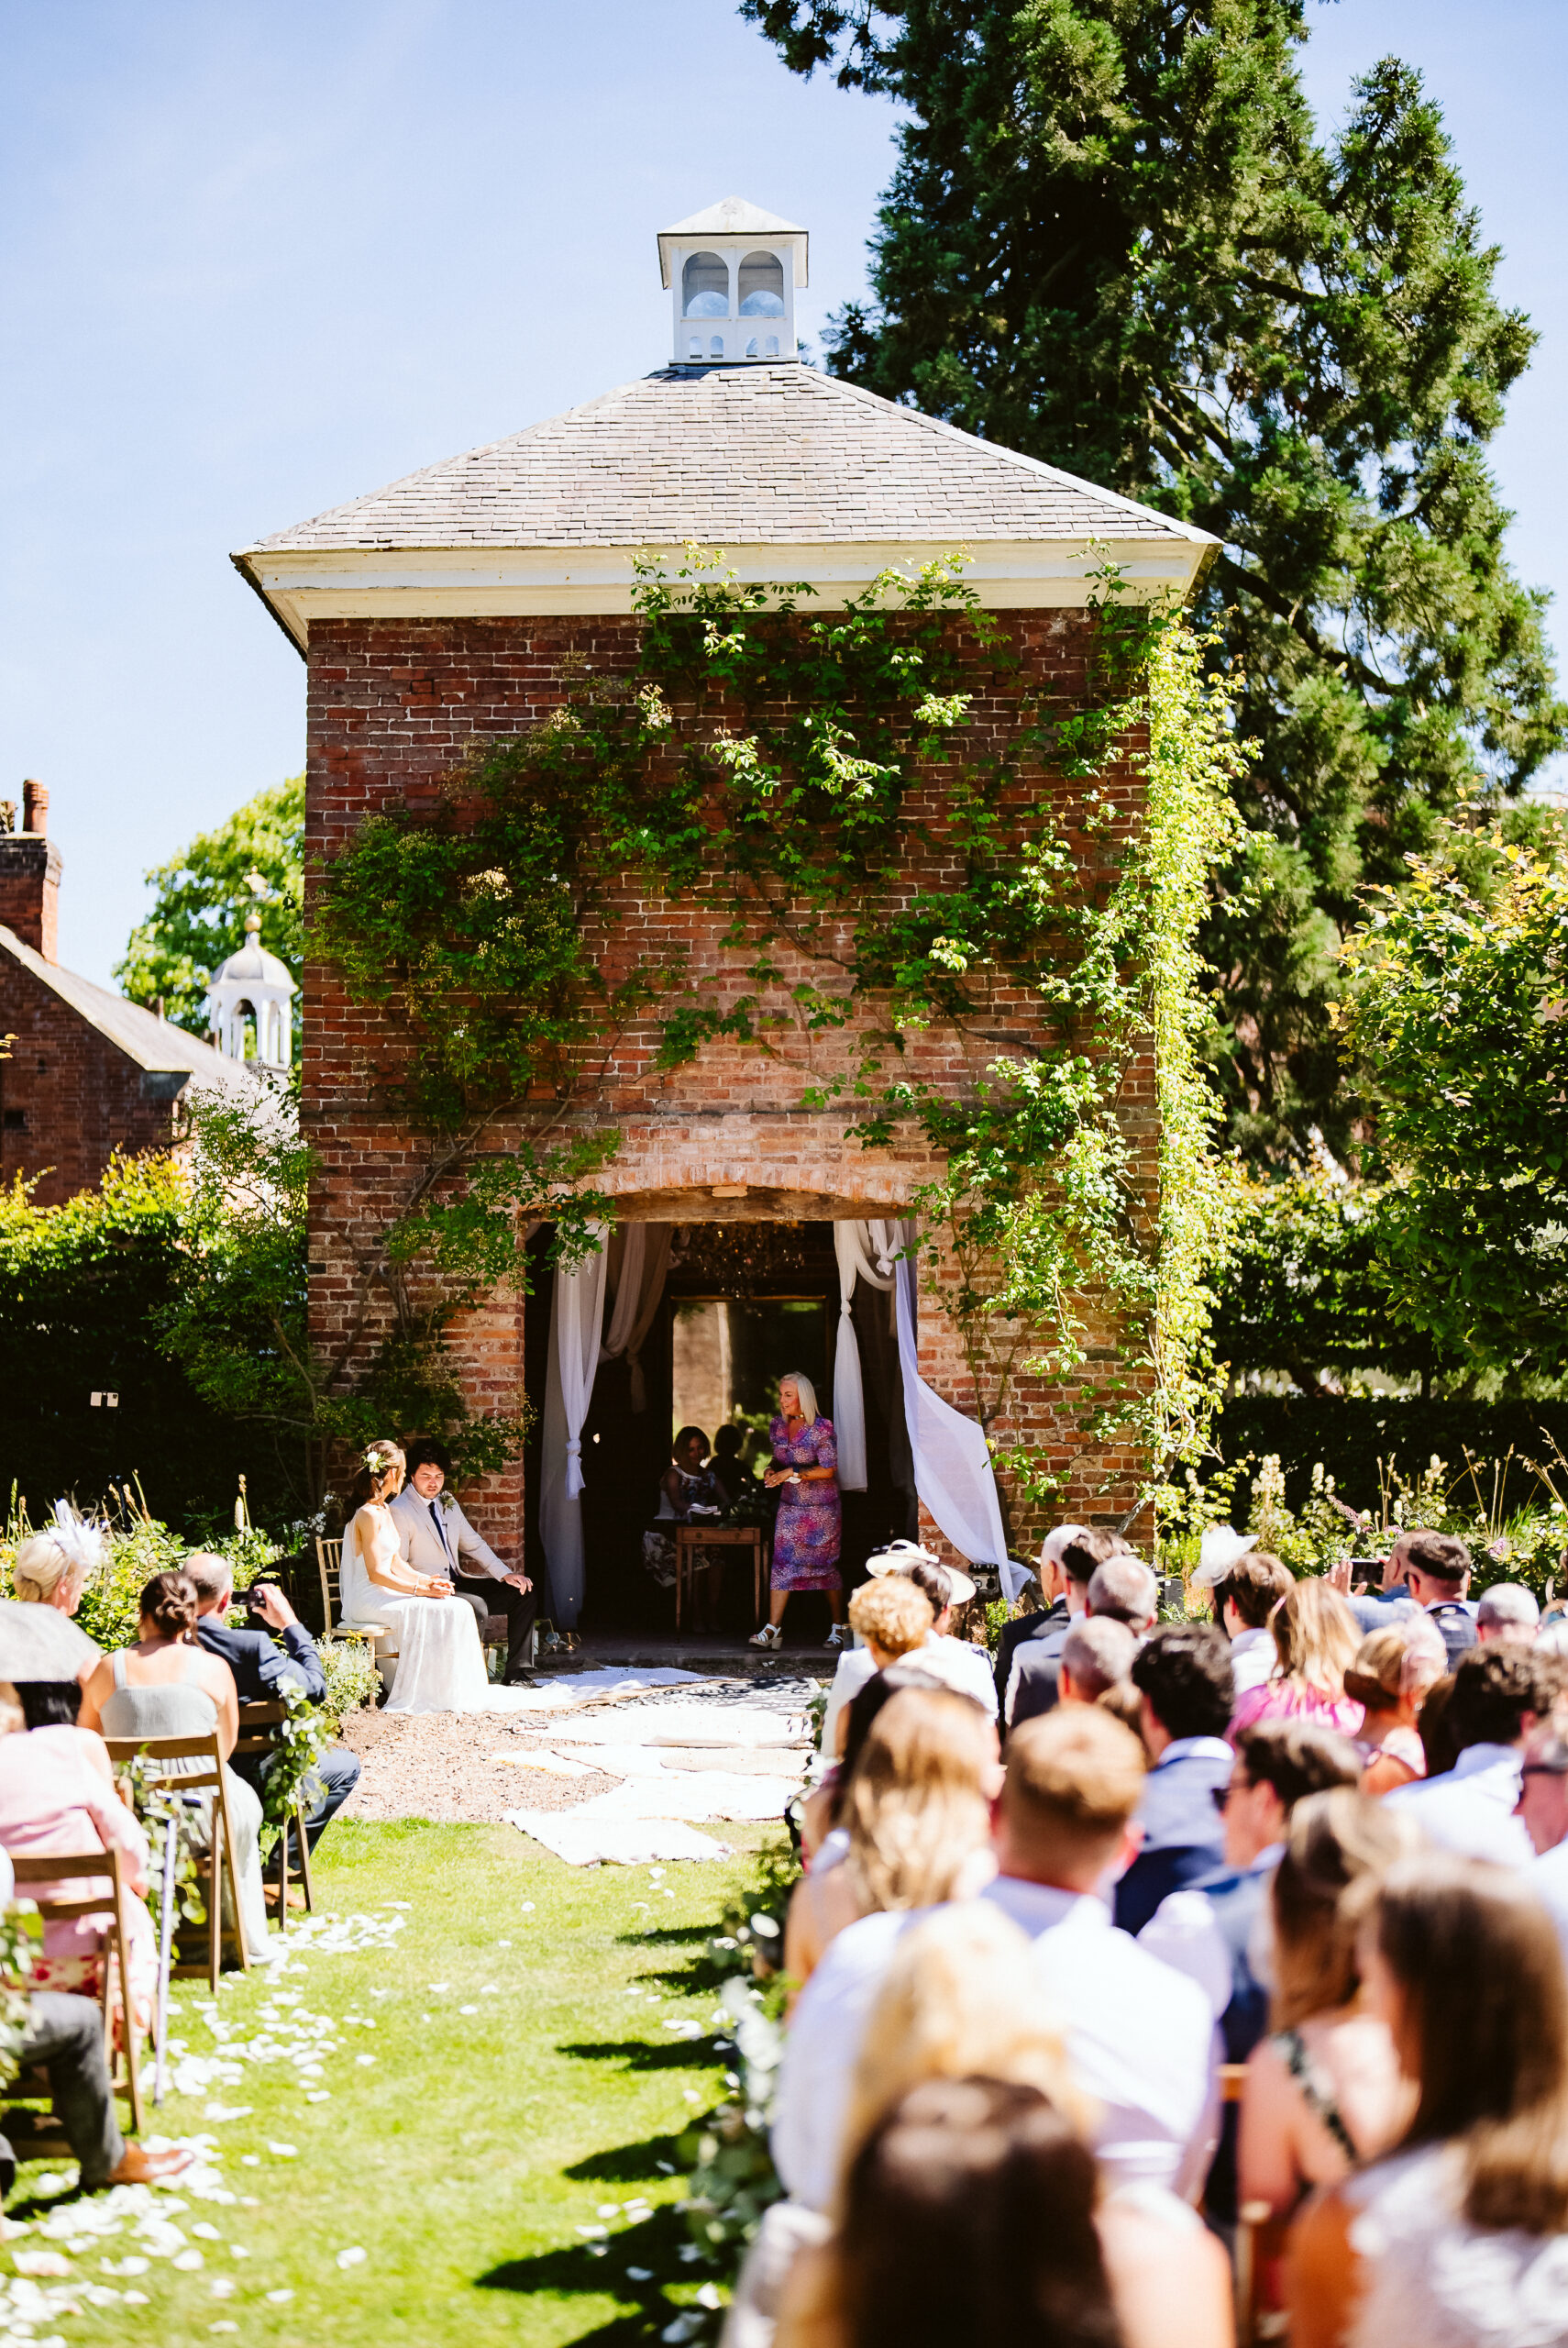 A tall redbrick square outhouse with a slate roof and climbing roses up the walls is in the background of the image and rows of brown wooden chairs have been set up with an aisle in between for an outdoor wedding ceremony